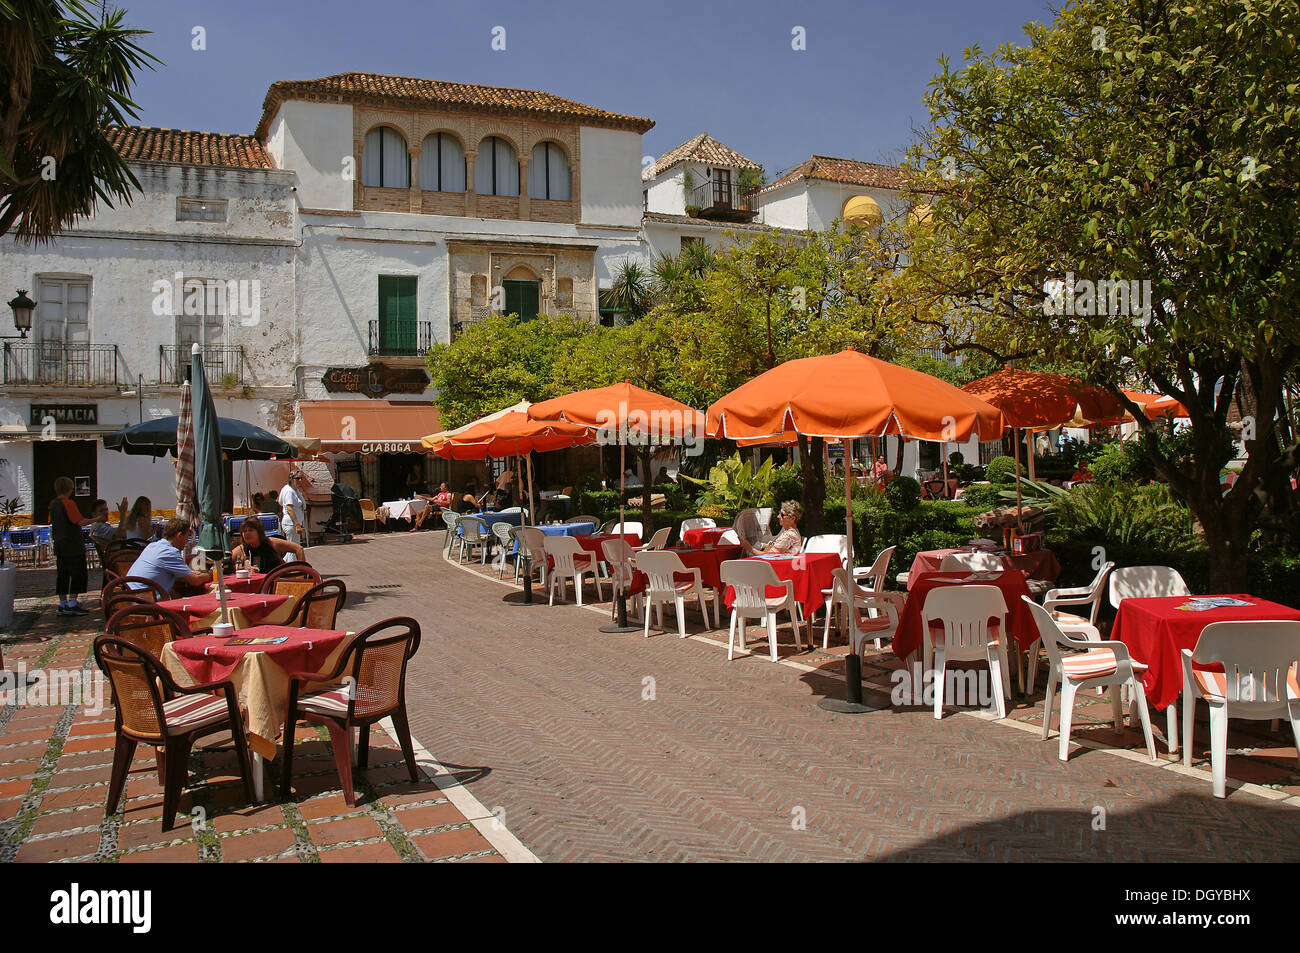 Urban view, Old town, Marbella, Malaga-province, Region of Andalusia, Spain, Europe Stock Photo